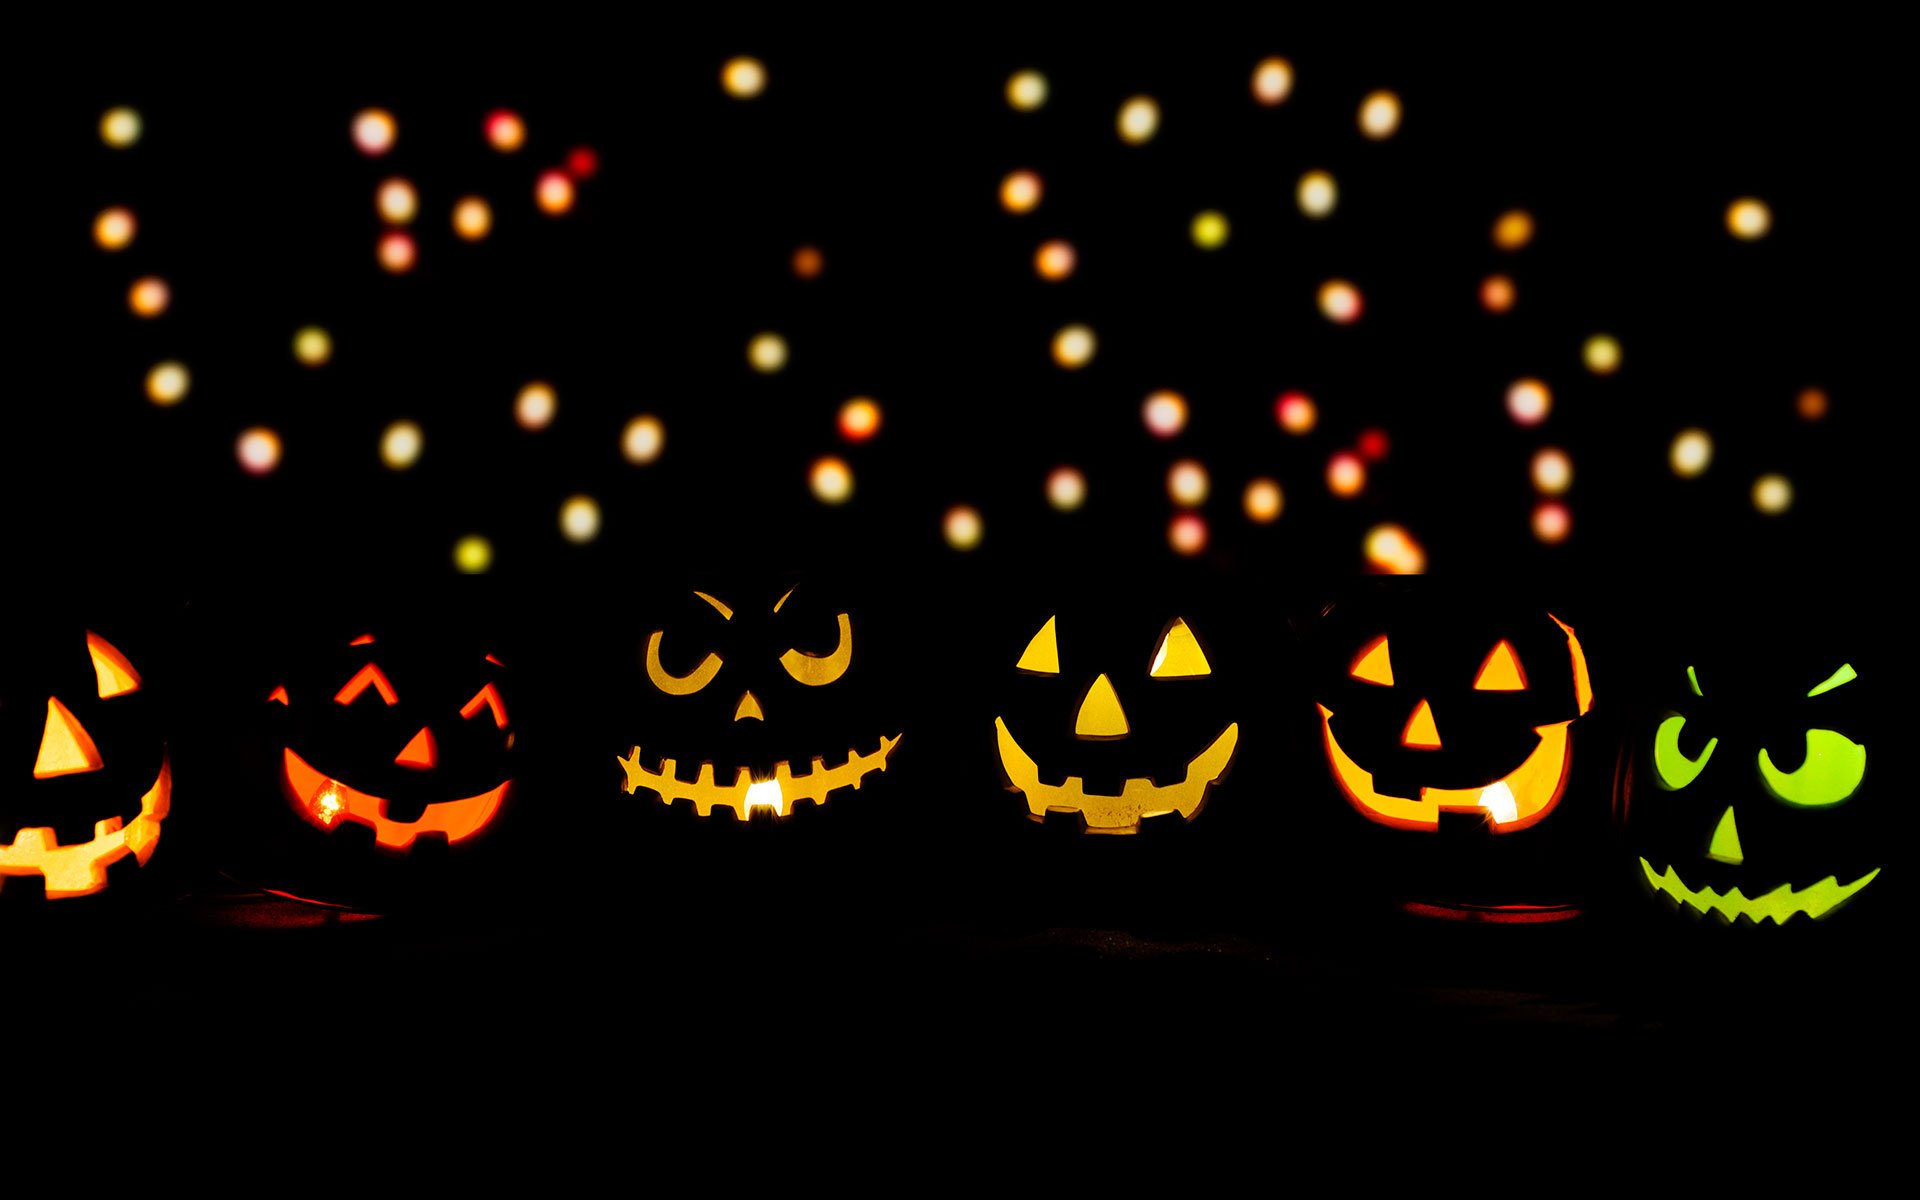 Scary Happy Halloween 2015 Images, Backgrounds, Wallpapers, Ideas ...